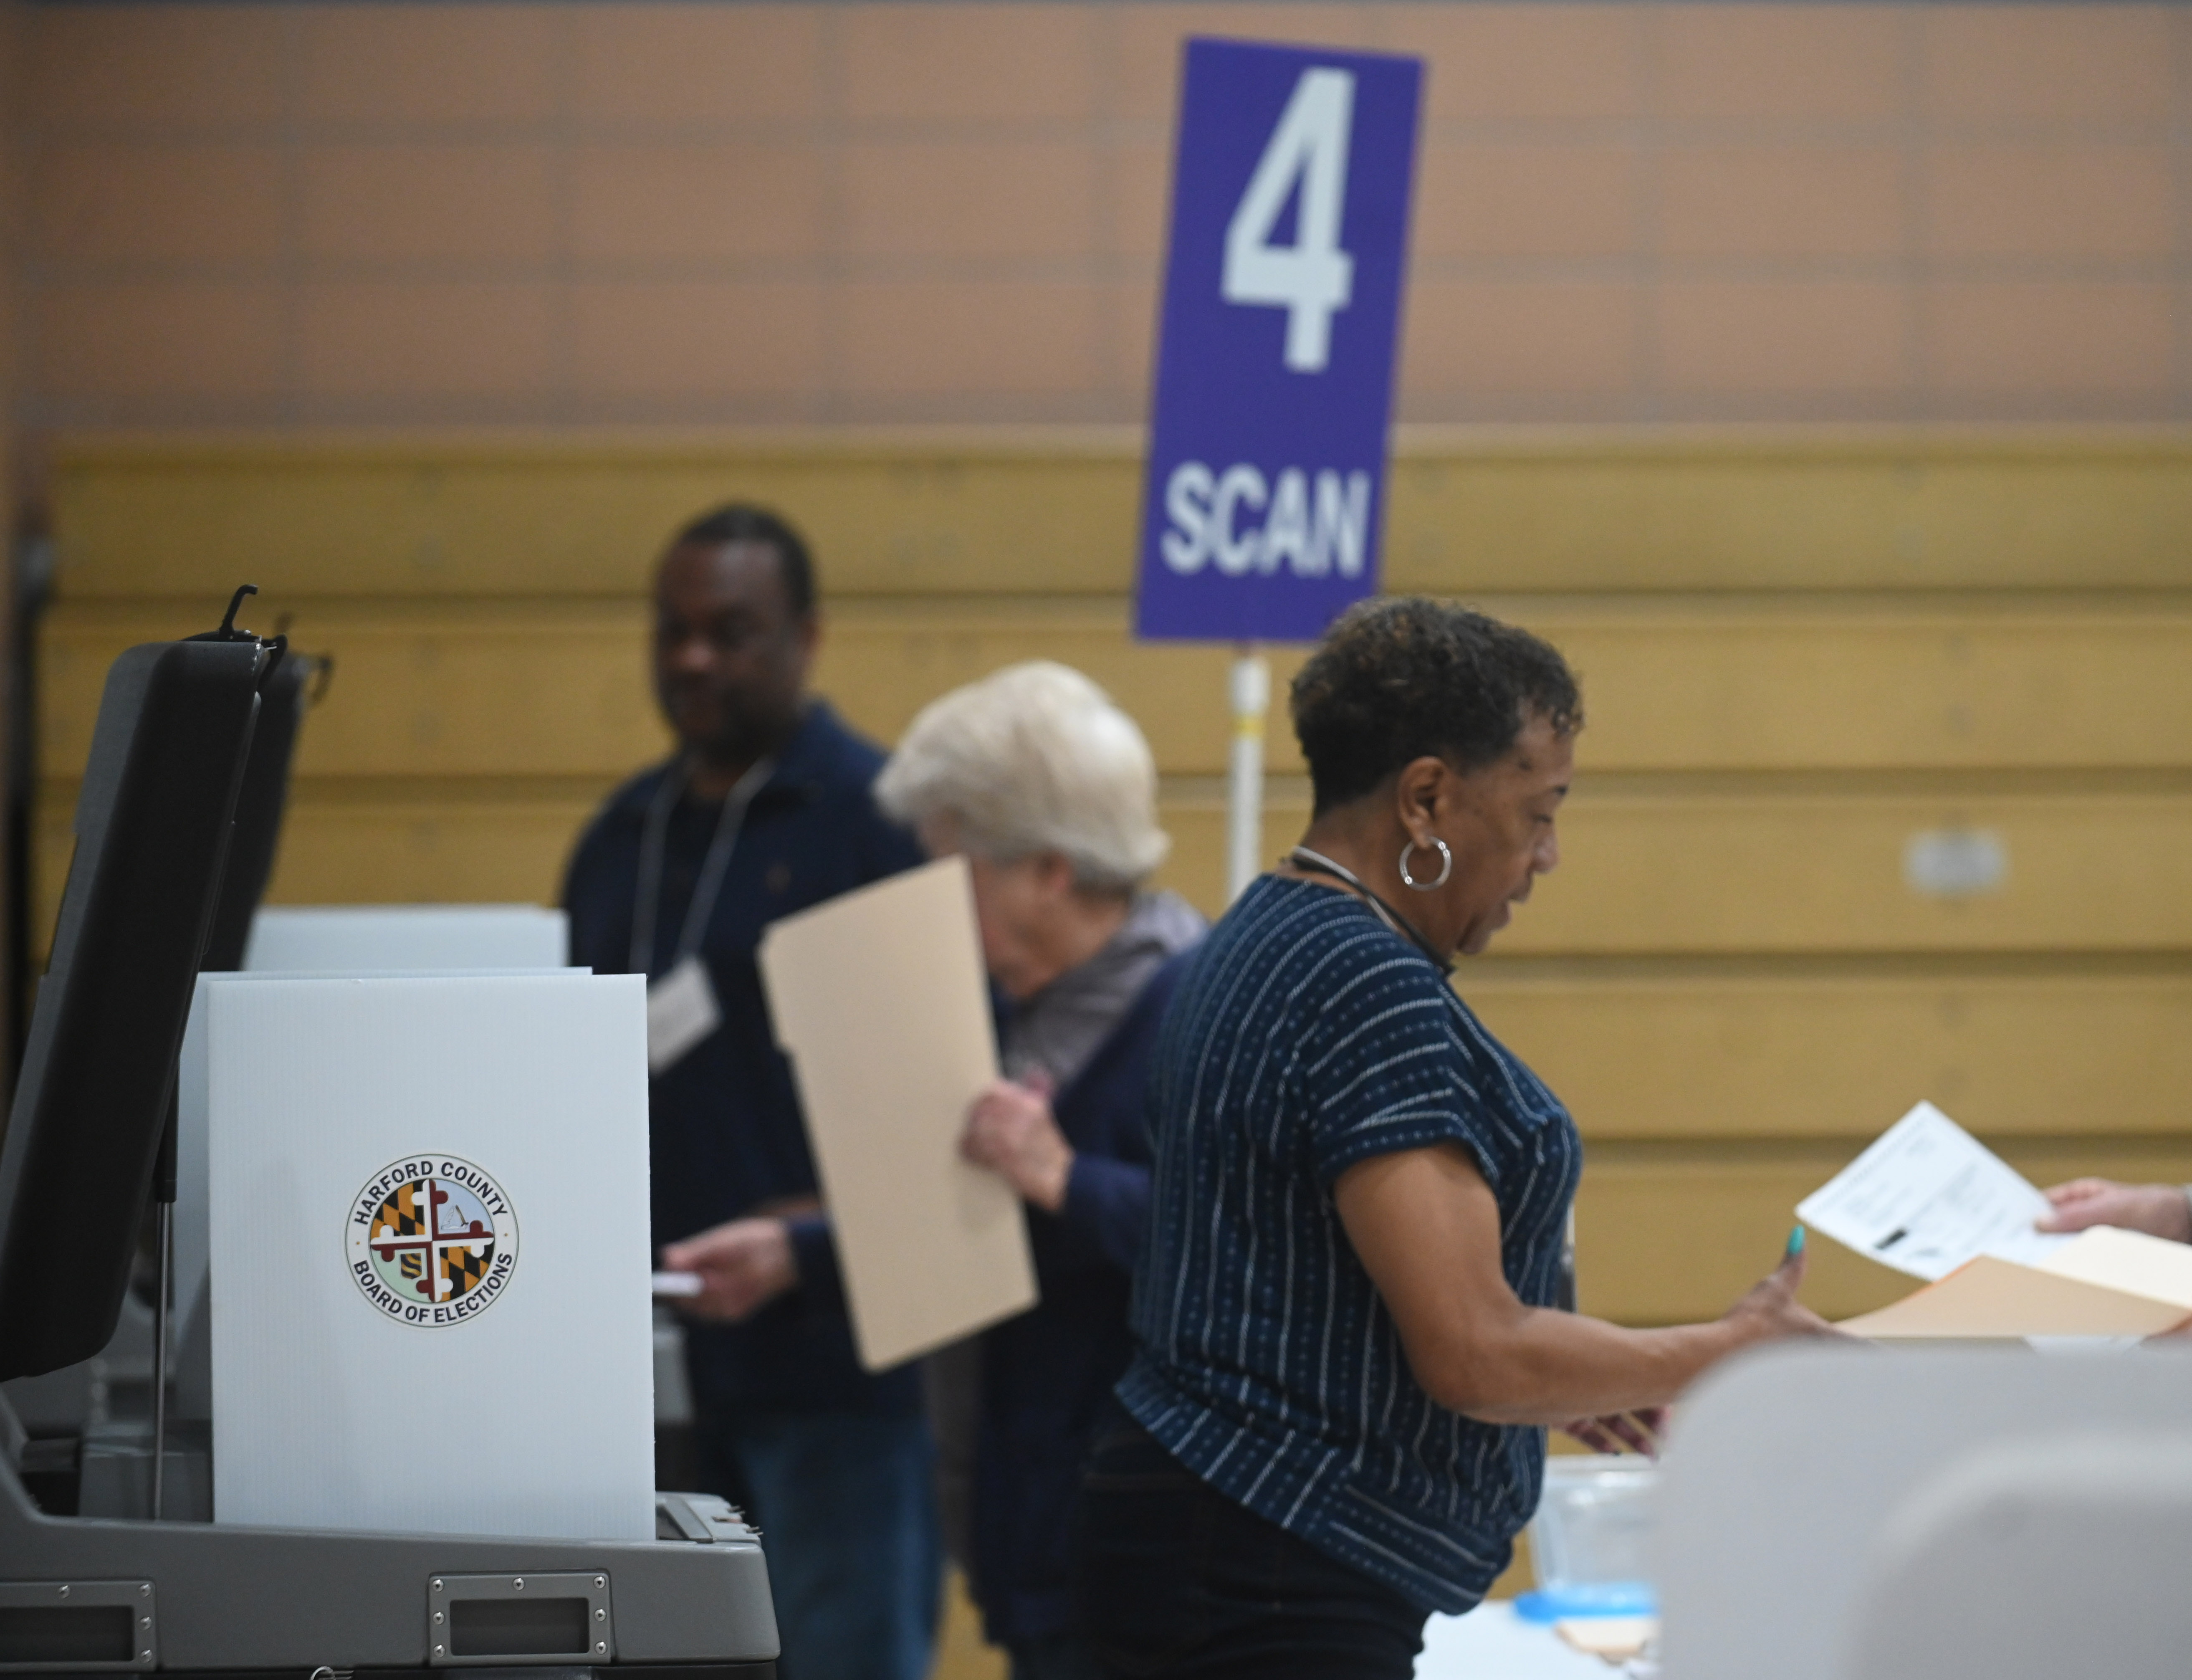 Election officials help voters scan their ballots at the polling location at Church Creek Elementary for Maryland's primary election on Tuesday. (Brian Krista/staff photo)